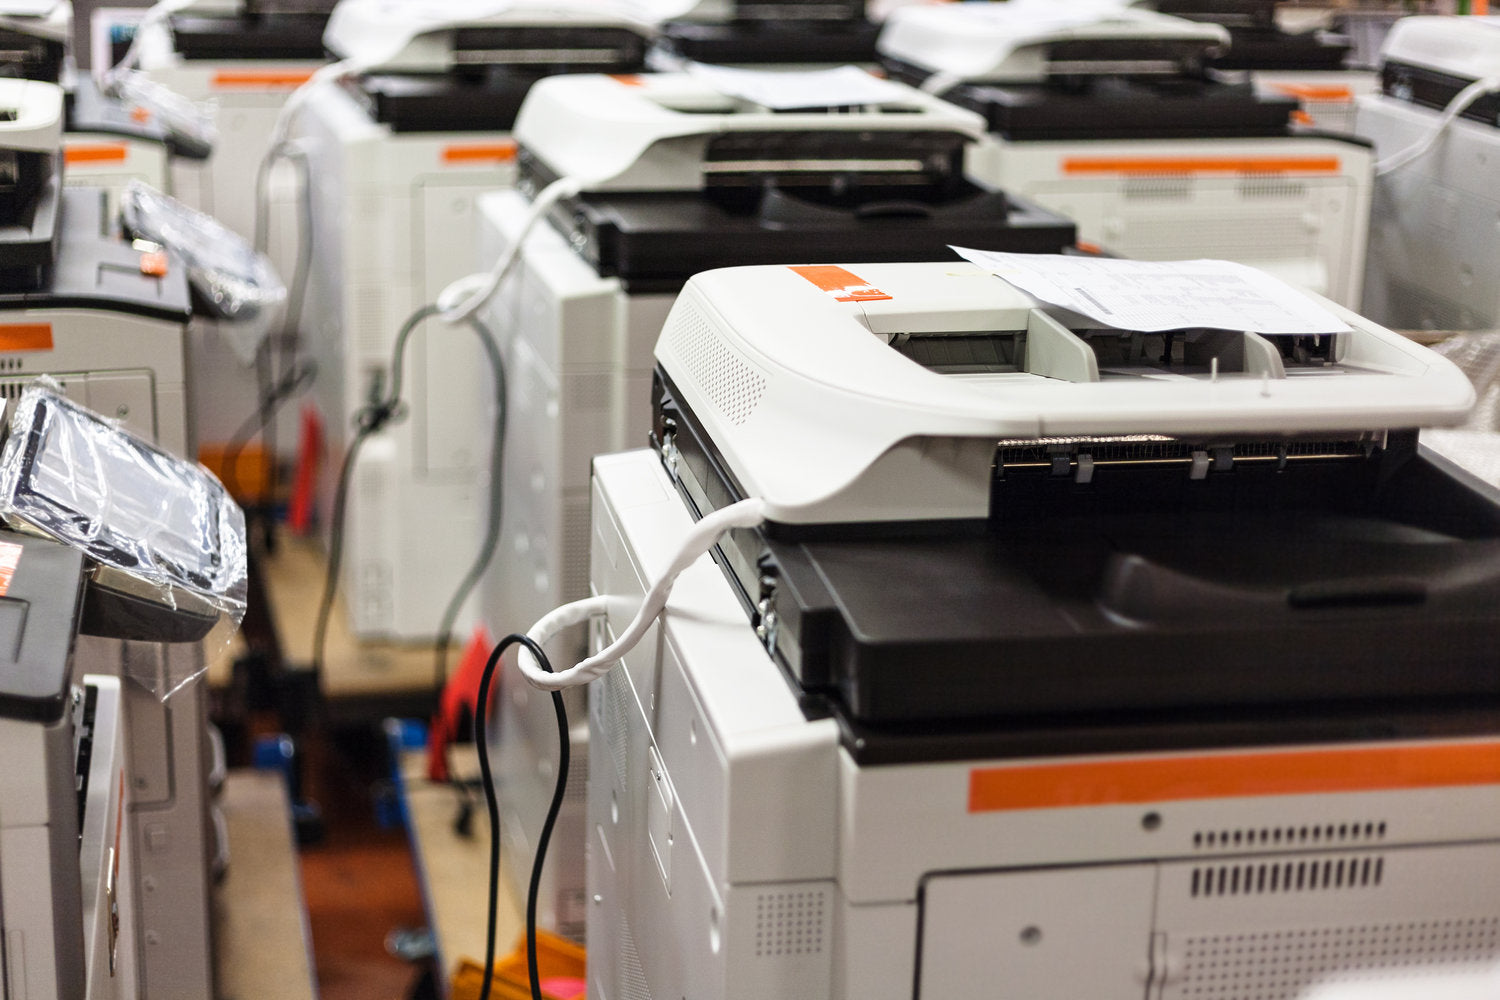 Where To Find Used Commercial Copiers for Sale